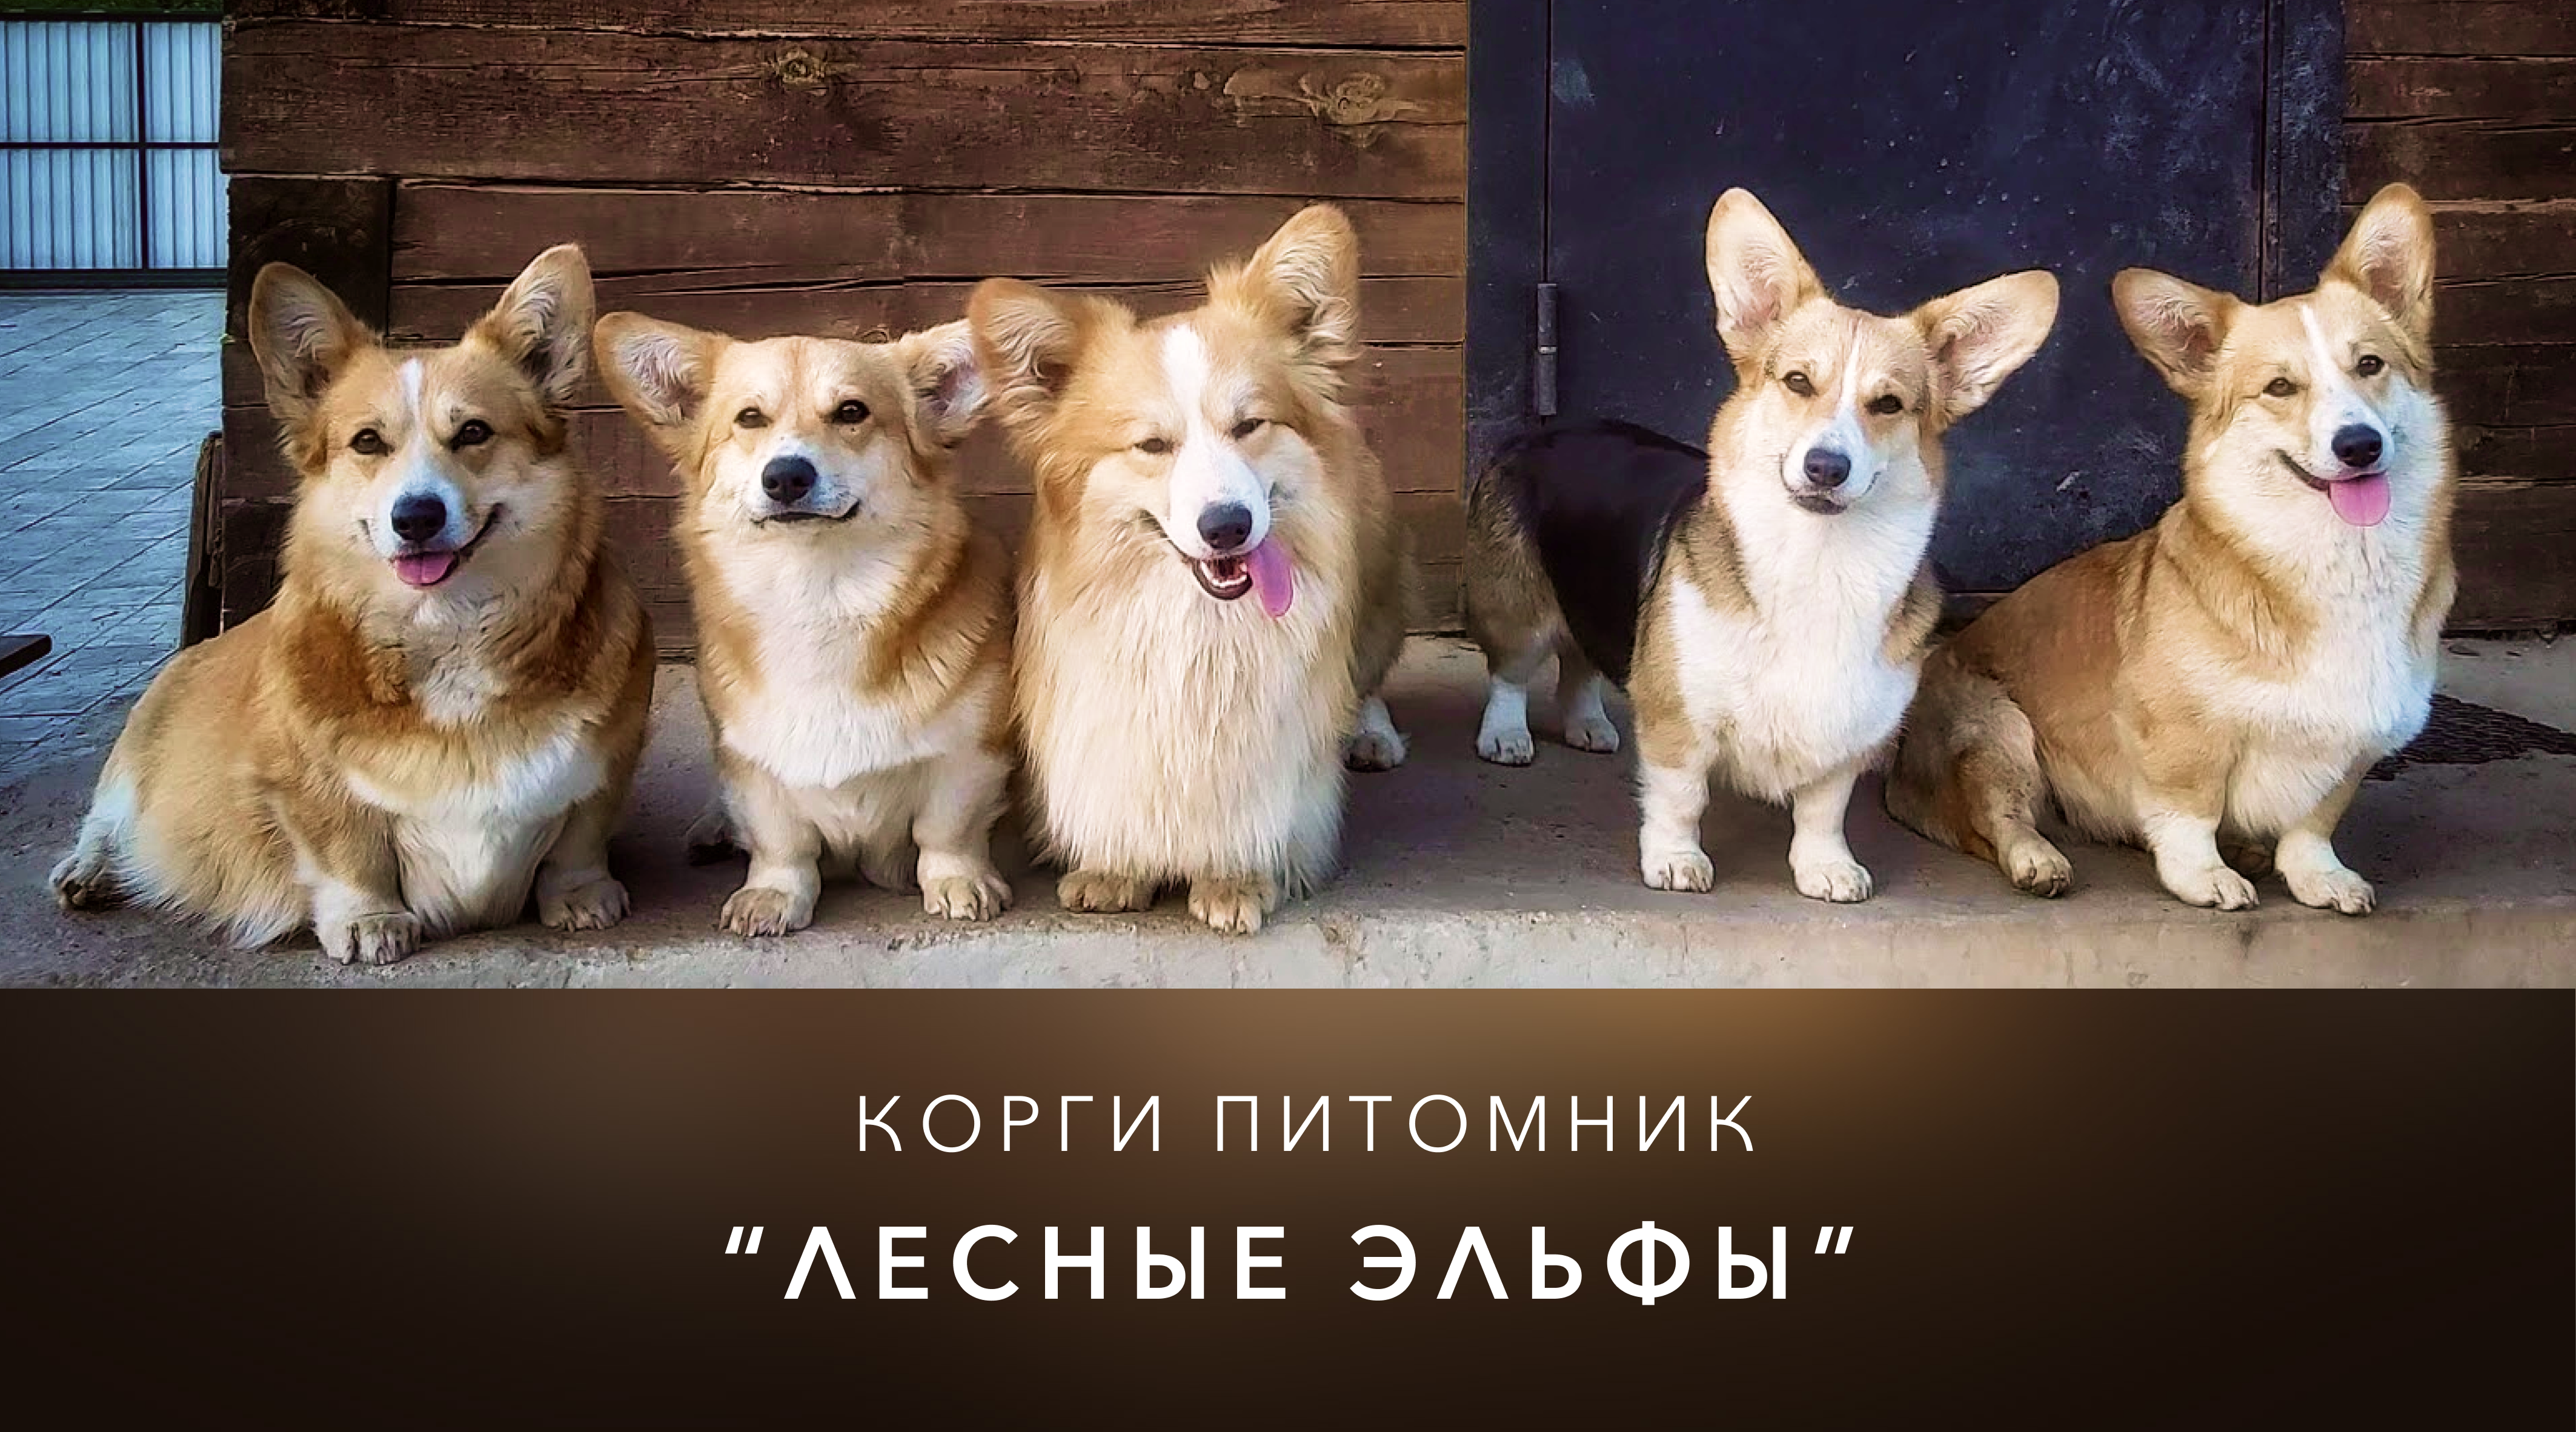 Corgis are waiting for you)